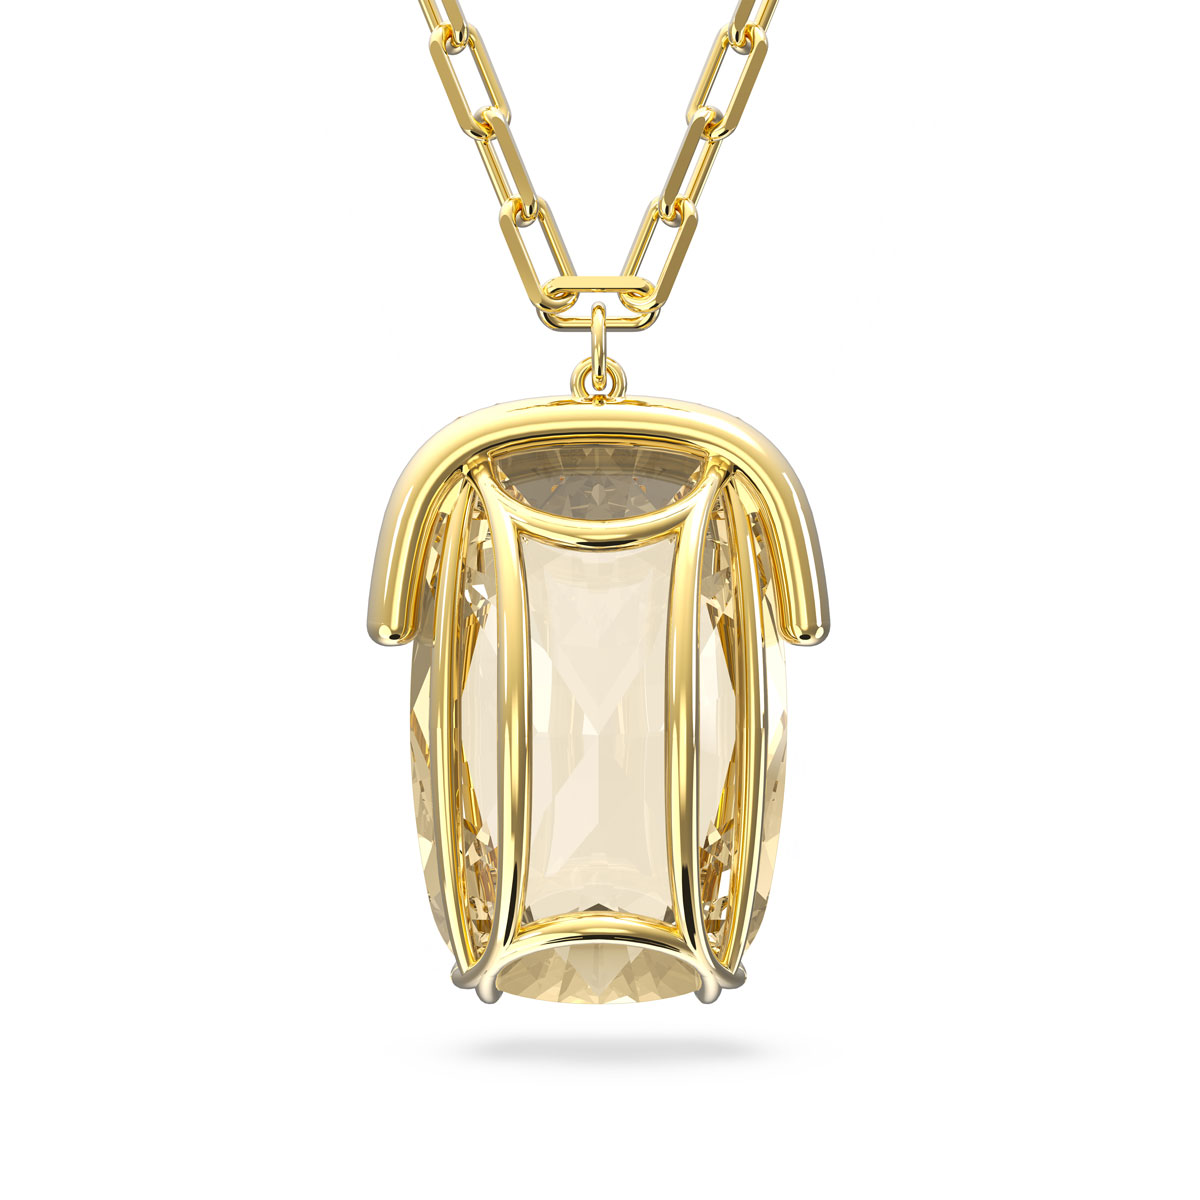 Swarovski Crystal Yellow and Gold Plated Harmonia Pendant Necklace